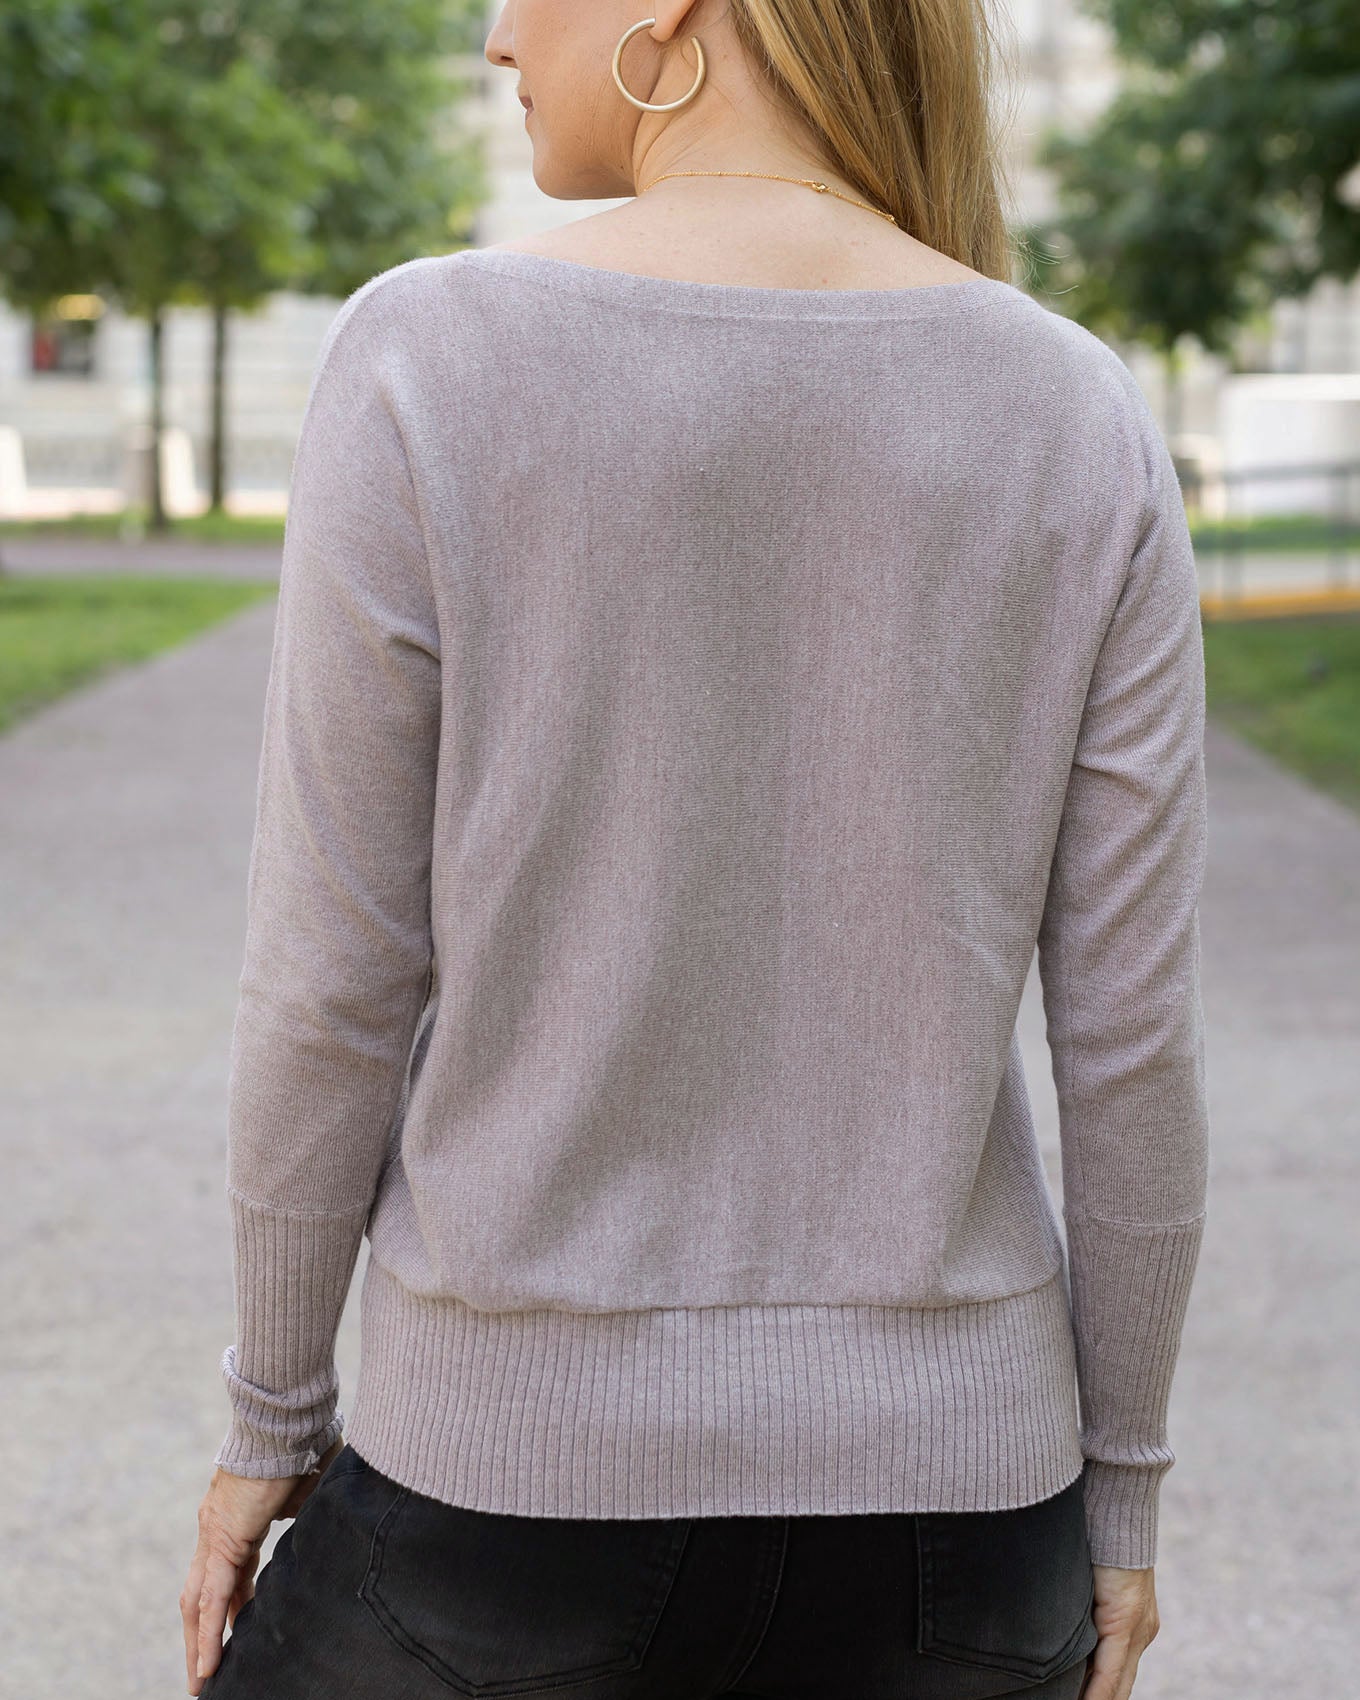 Back view of Almondine Classic and Cozy Sweater Top